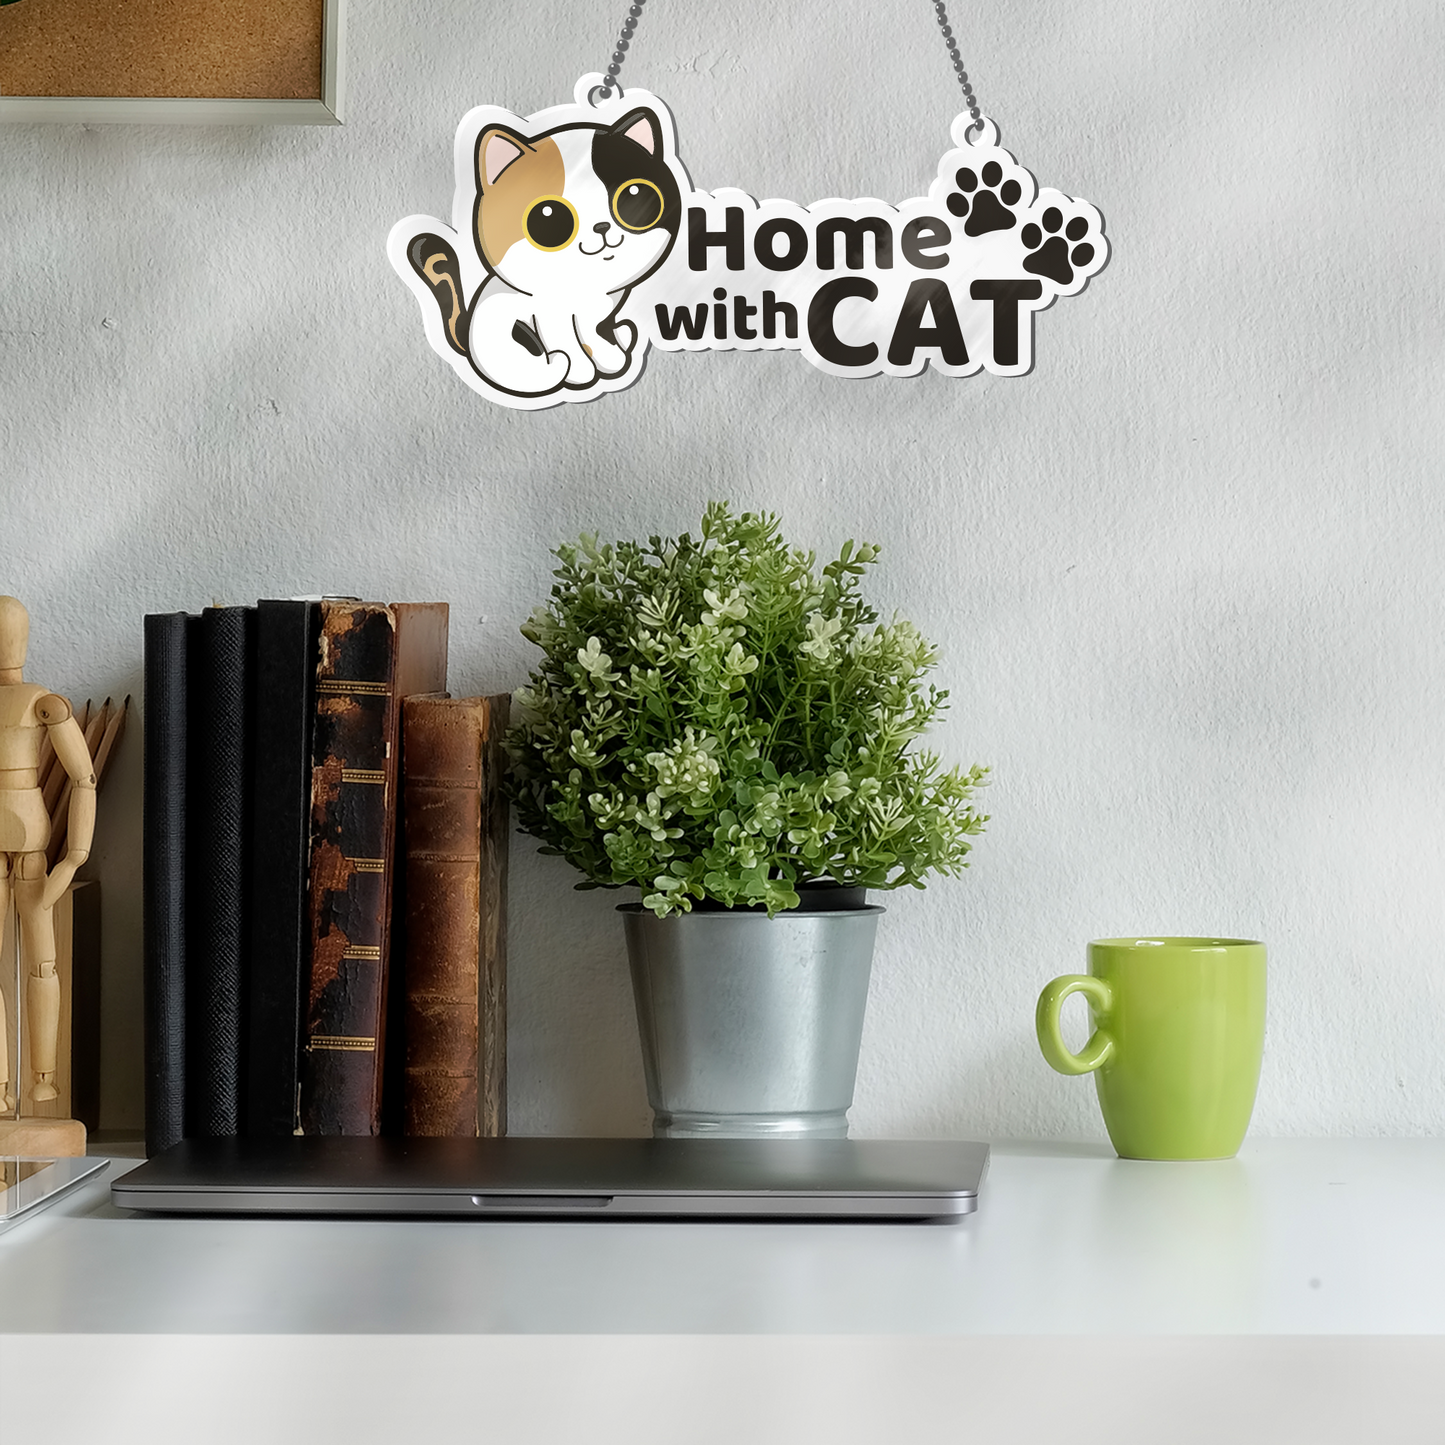 Home with pet 竉物 Transparent cat and dog listing